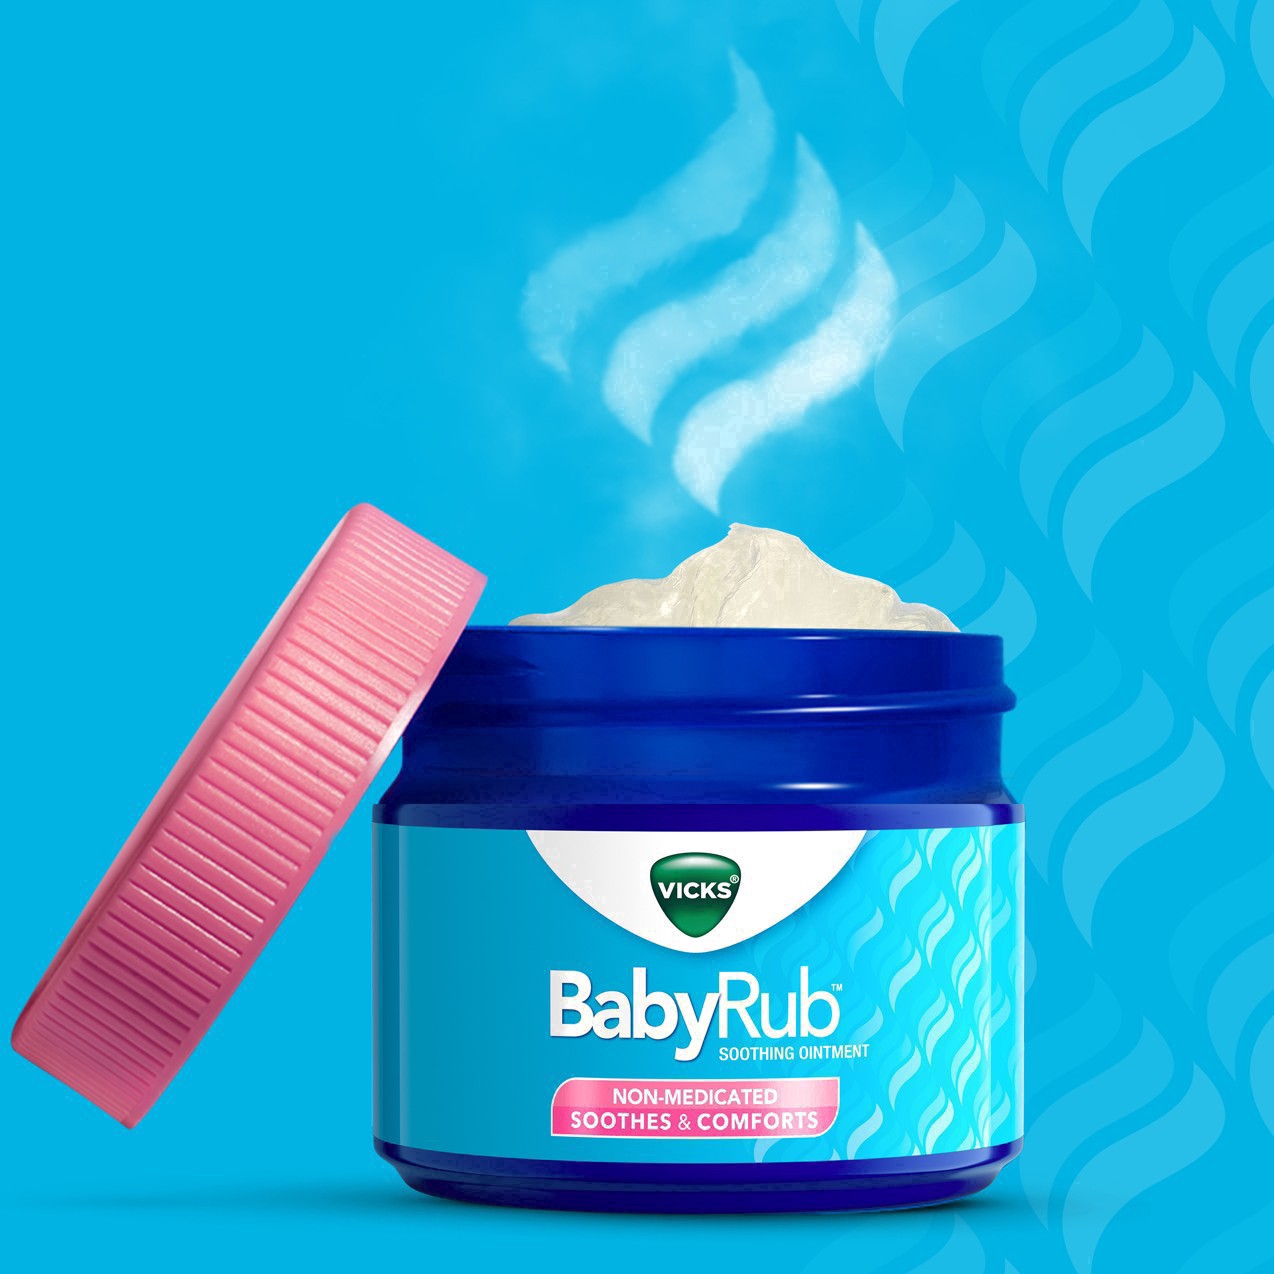 slide 27 of 78, Vicks BabyRub, Chest Rub Ointment with Soothing Aloe, Eucalyptus, Lavender, and Rosemary, from The Makers of VapoRub, 1.76 oz, 1.76 oz